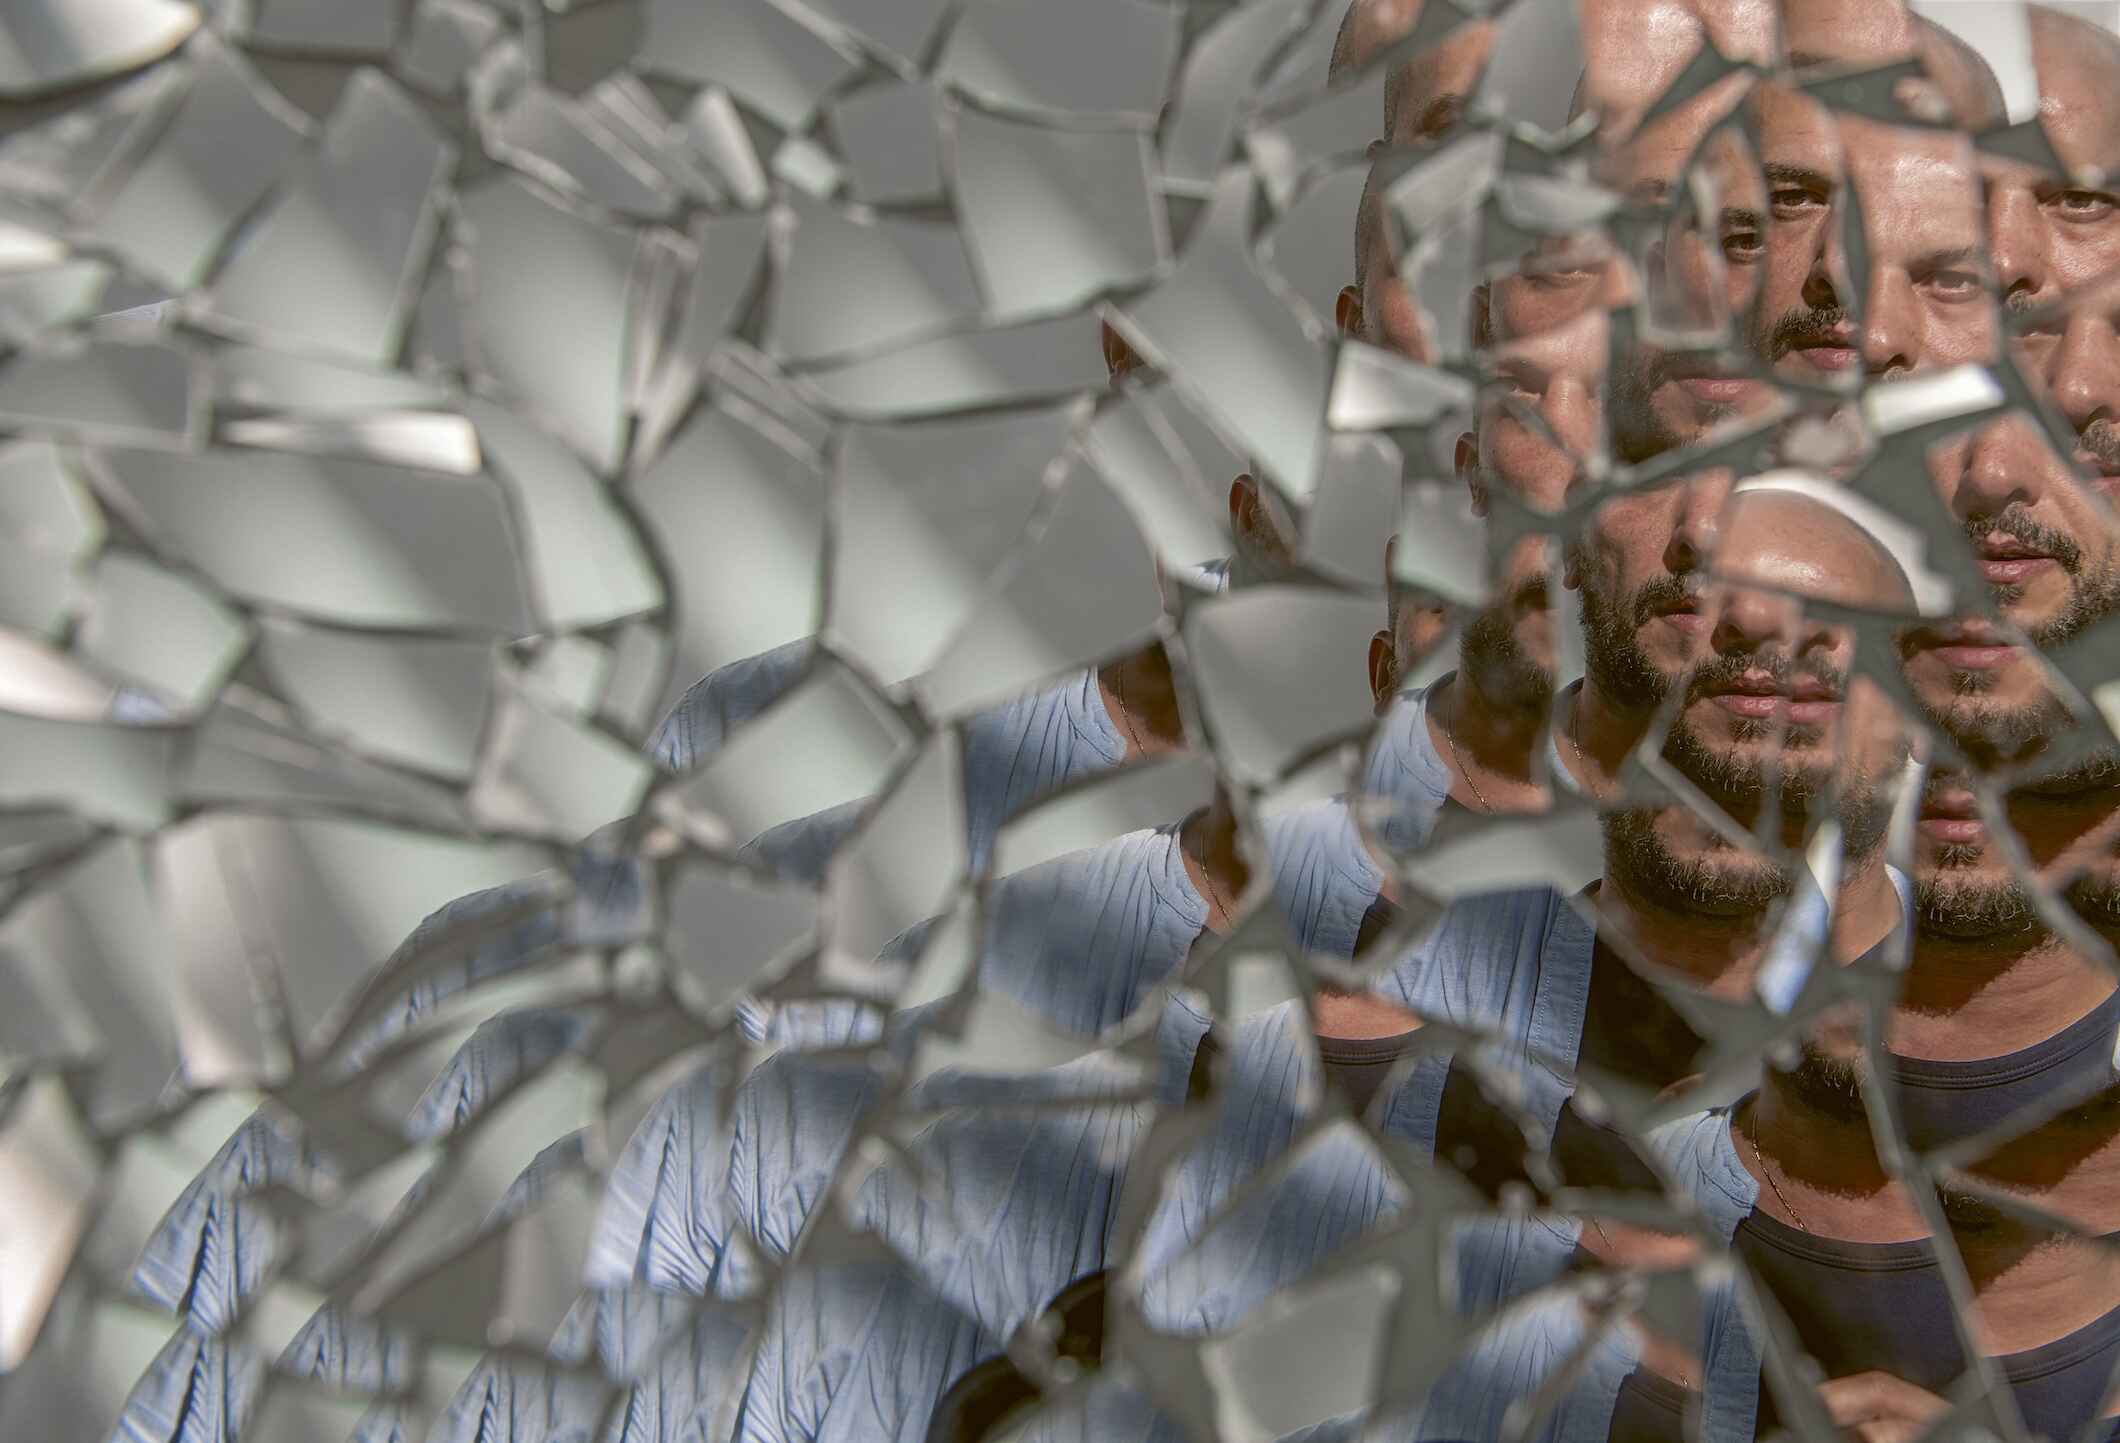 "Shattered Image of Oneself"